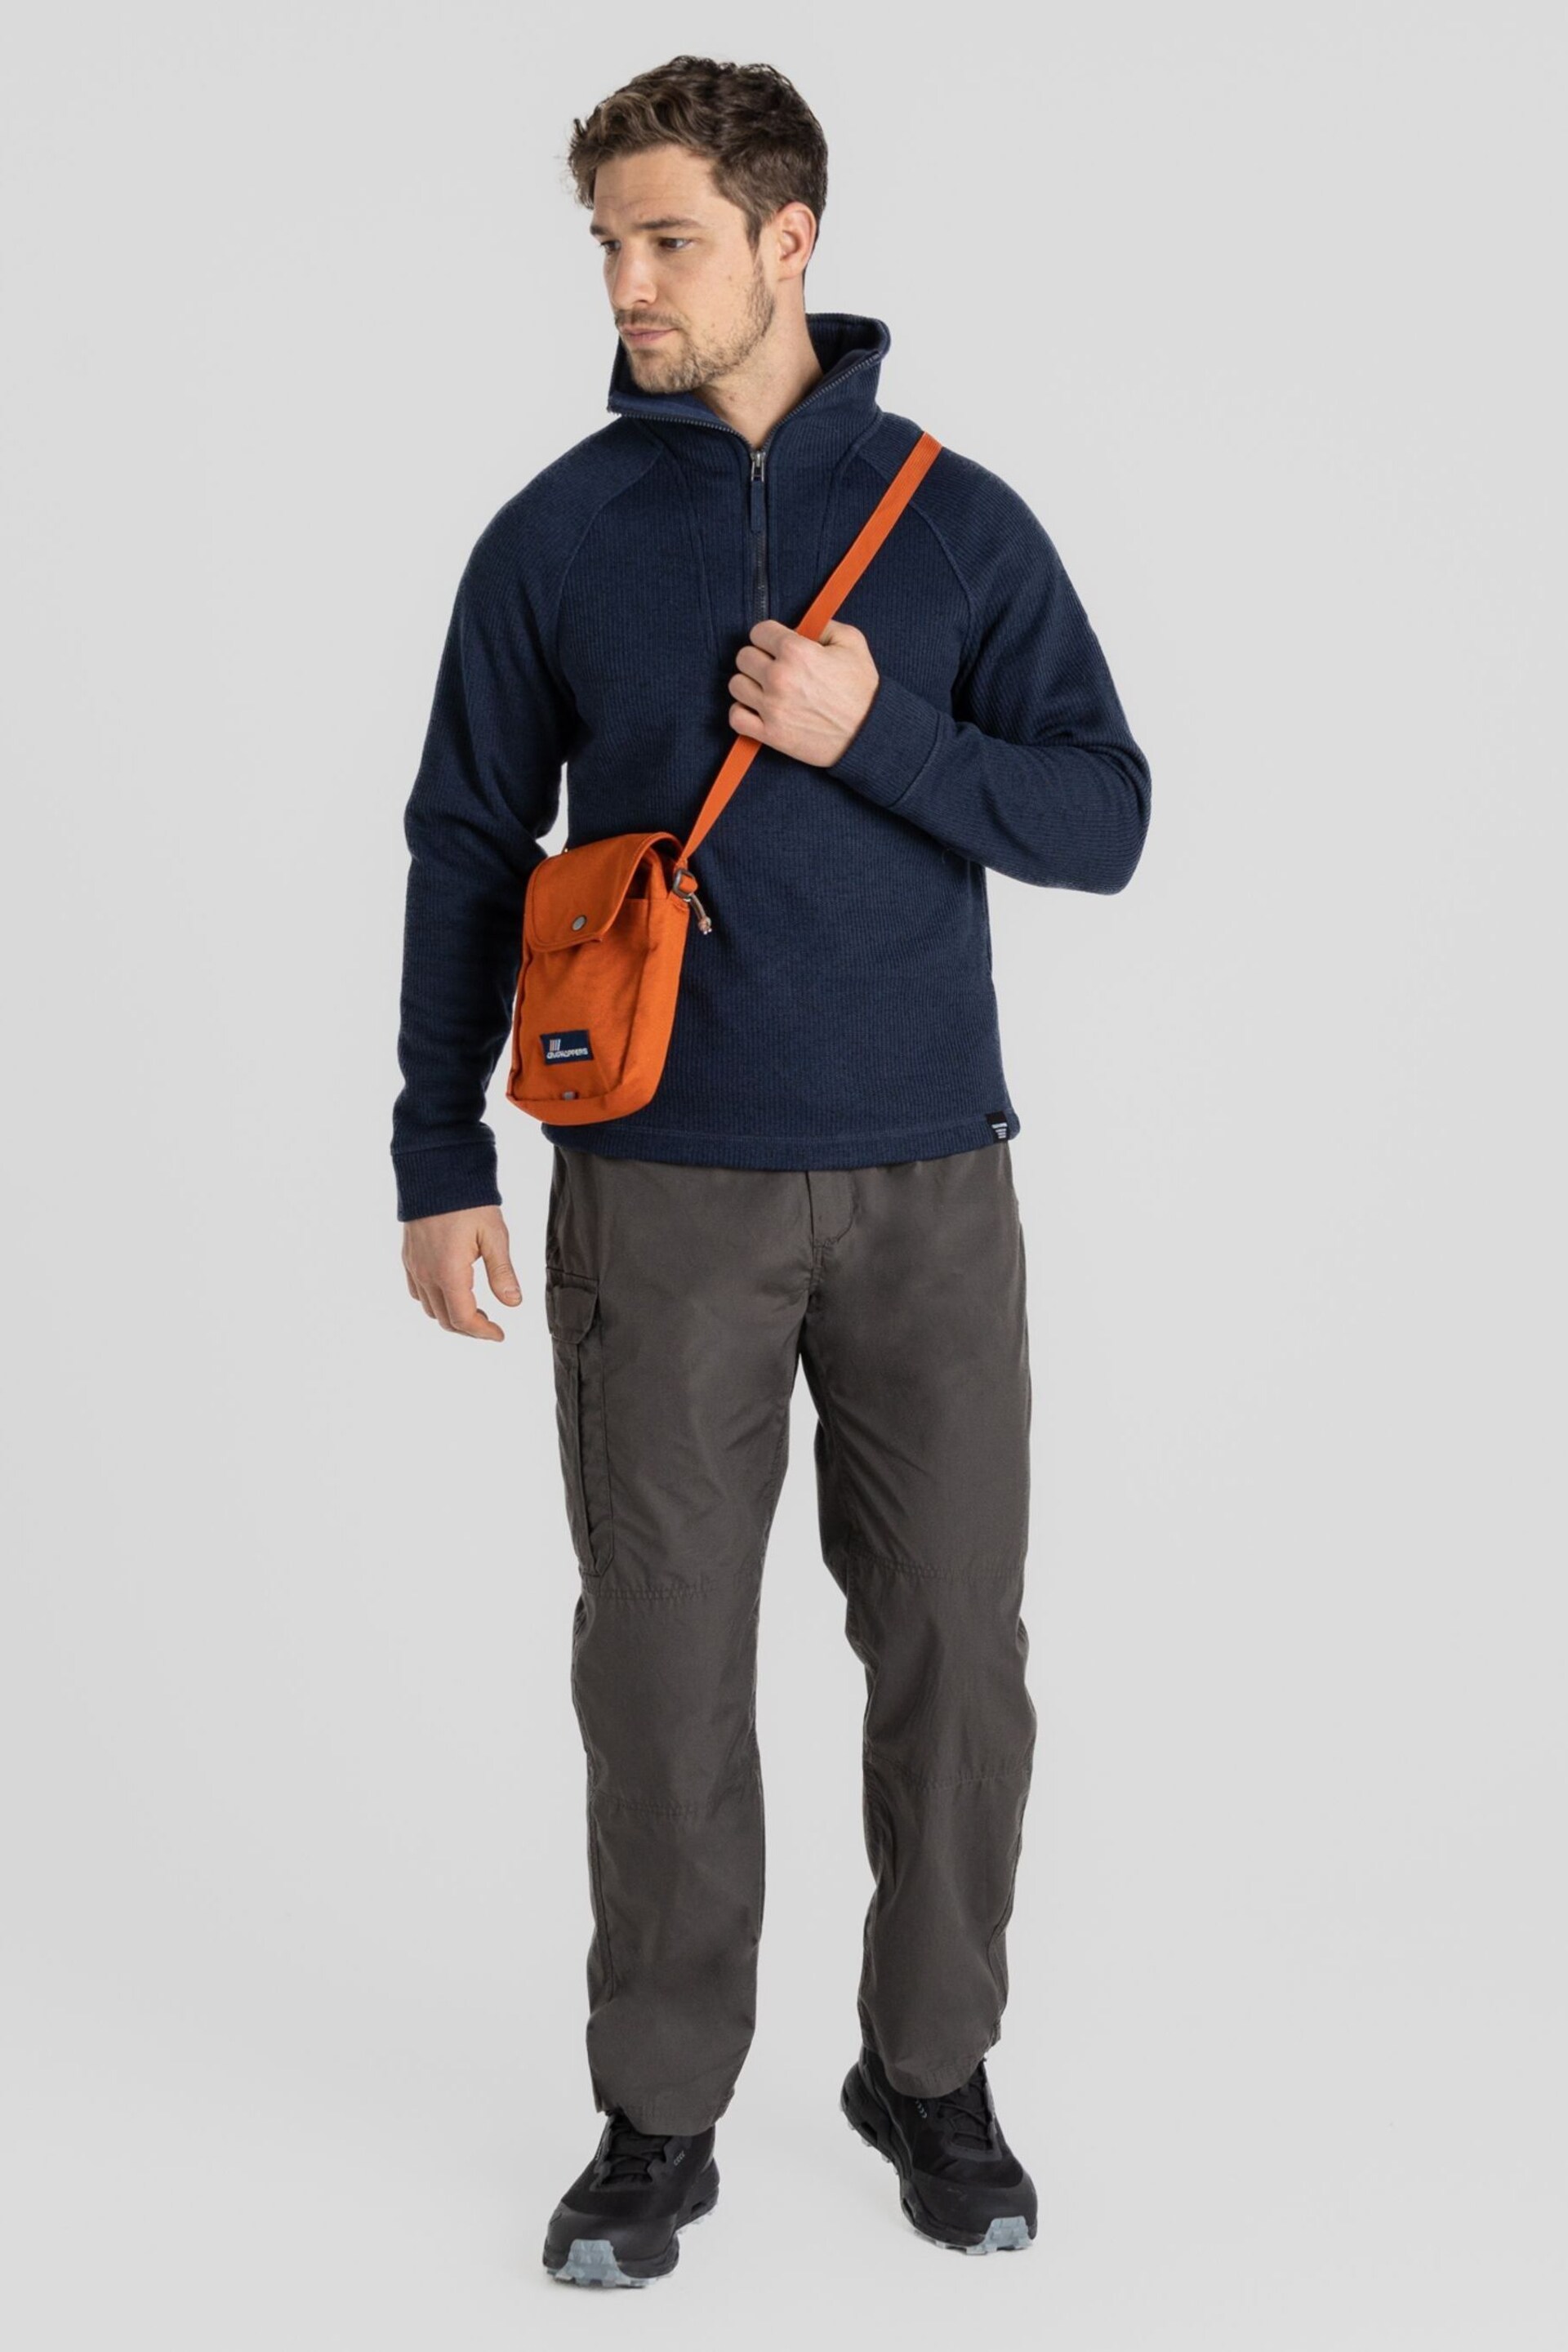 Craghoppers Blue Wole Half Zip Top - Image 1 of 7